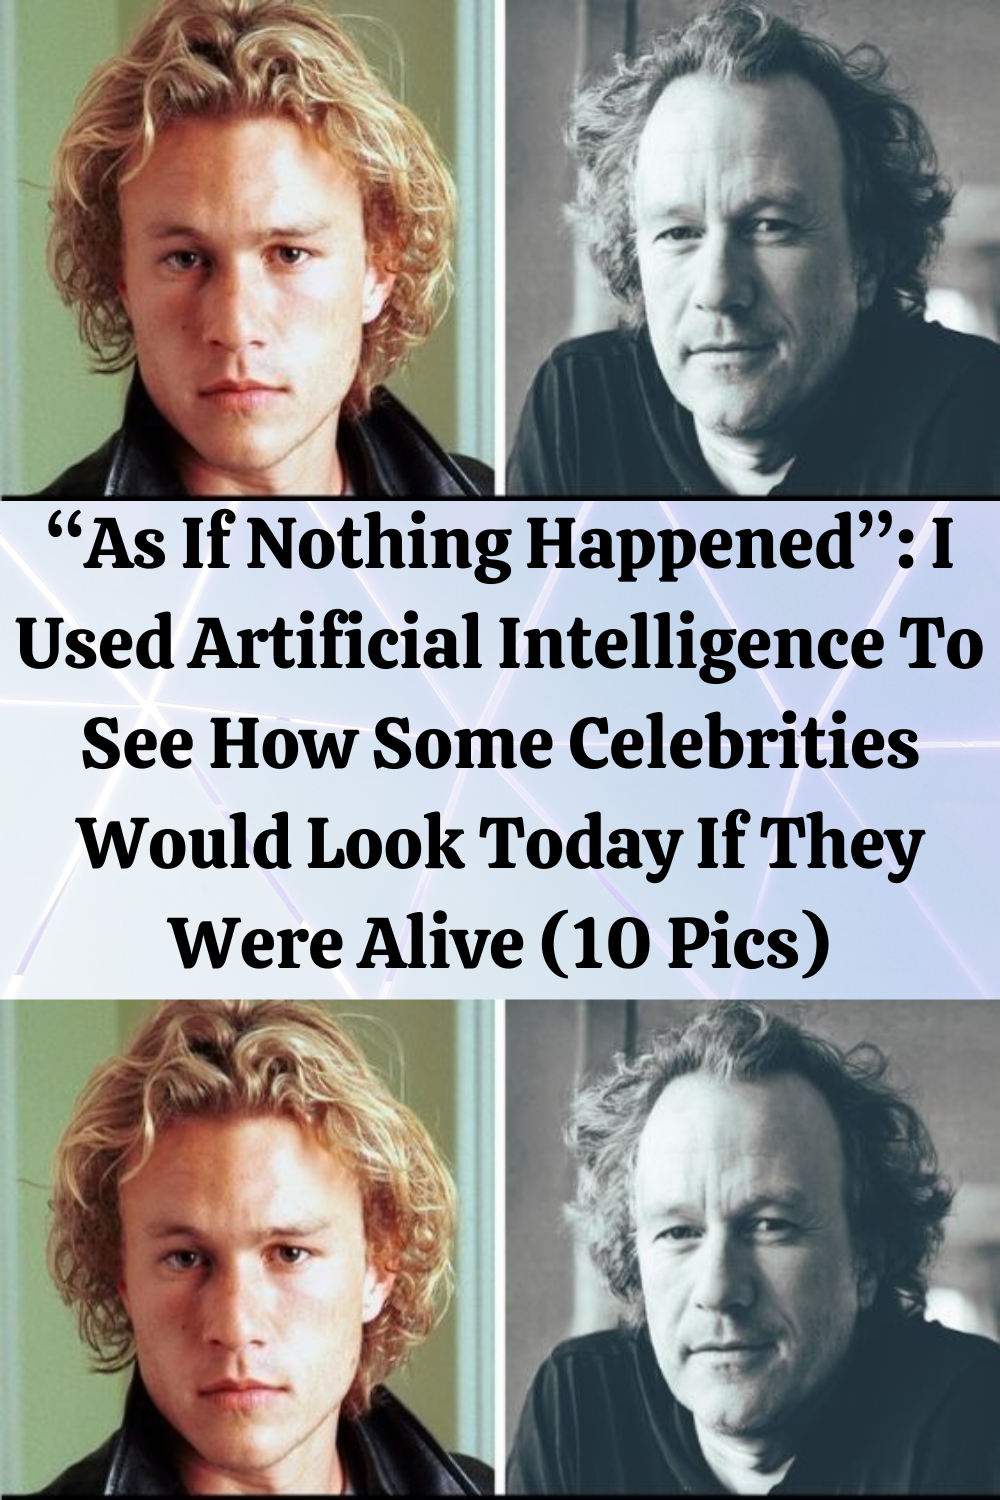 “As If Nothing Happened”: I Used Artificial Intelligence To See How Some Celebrities Would Look To